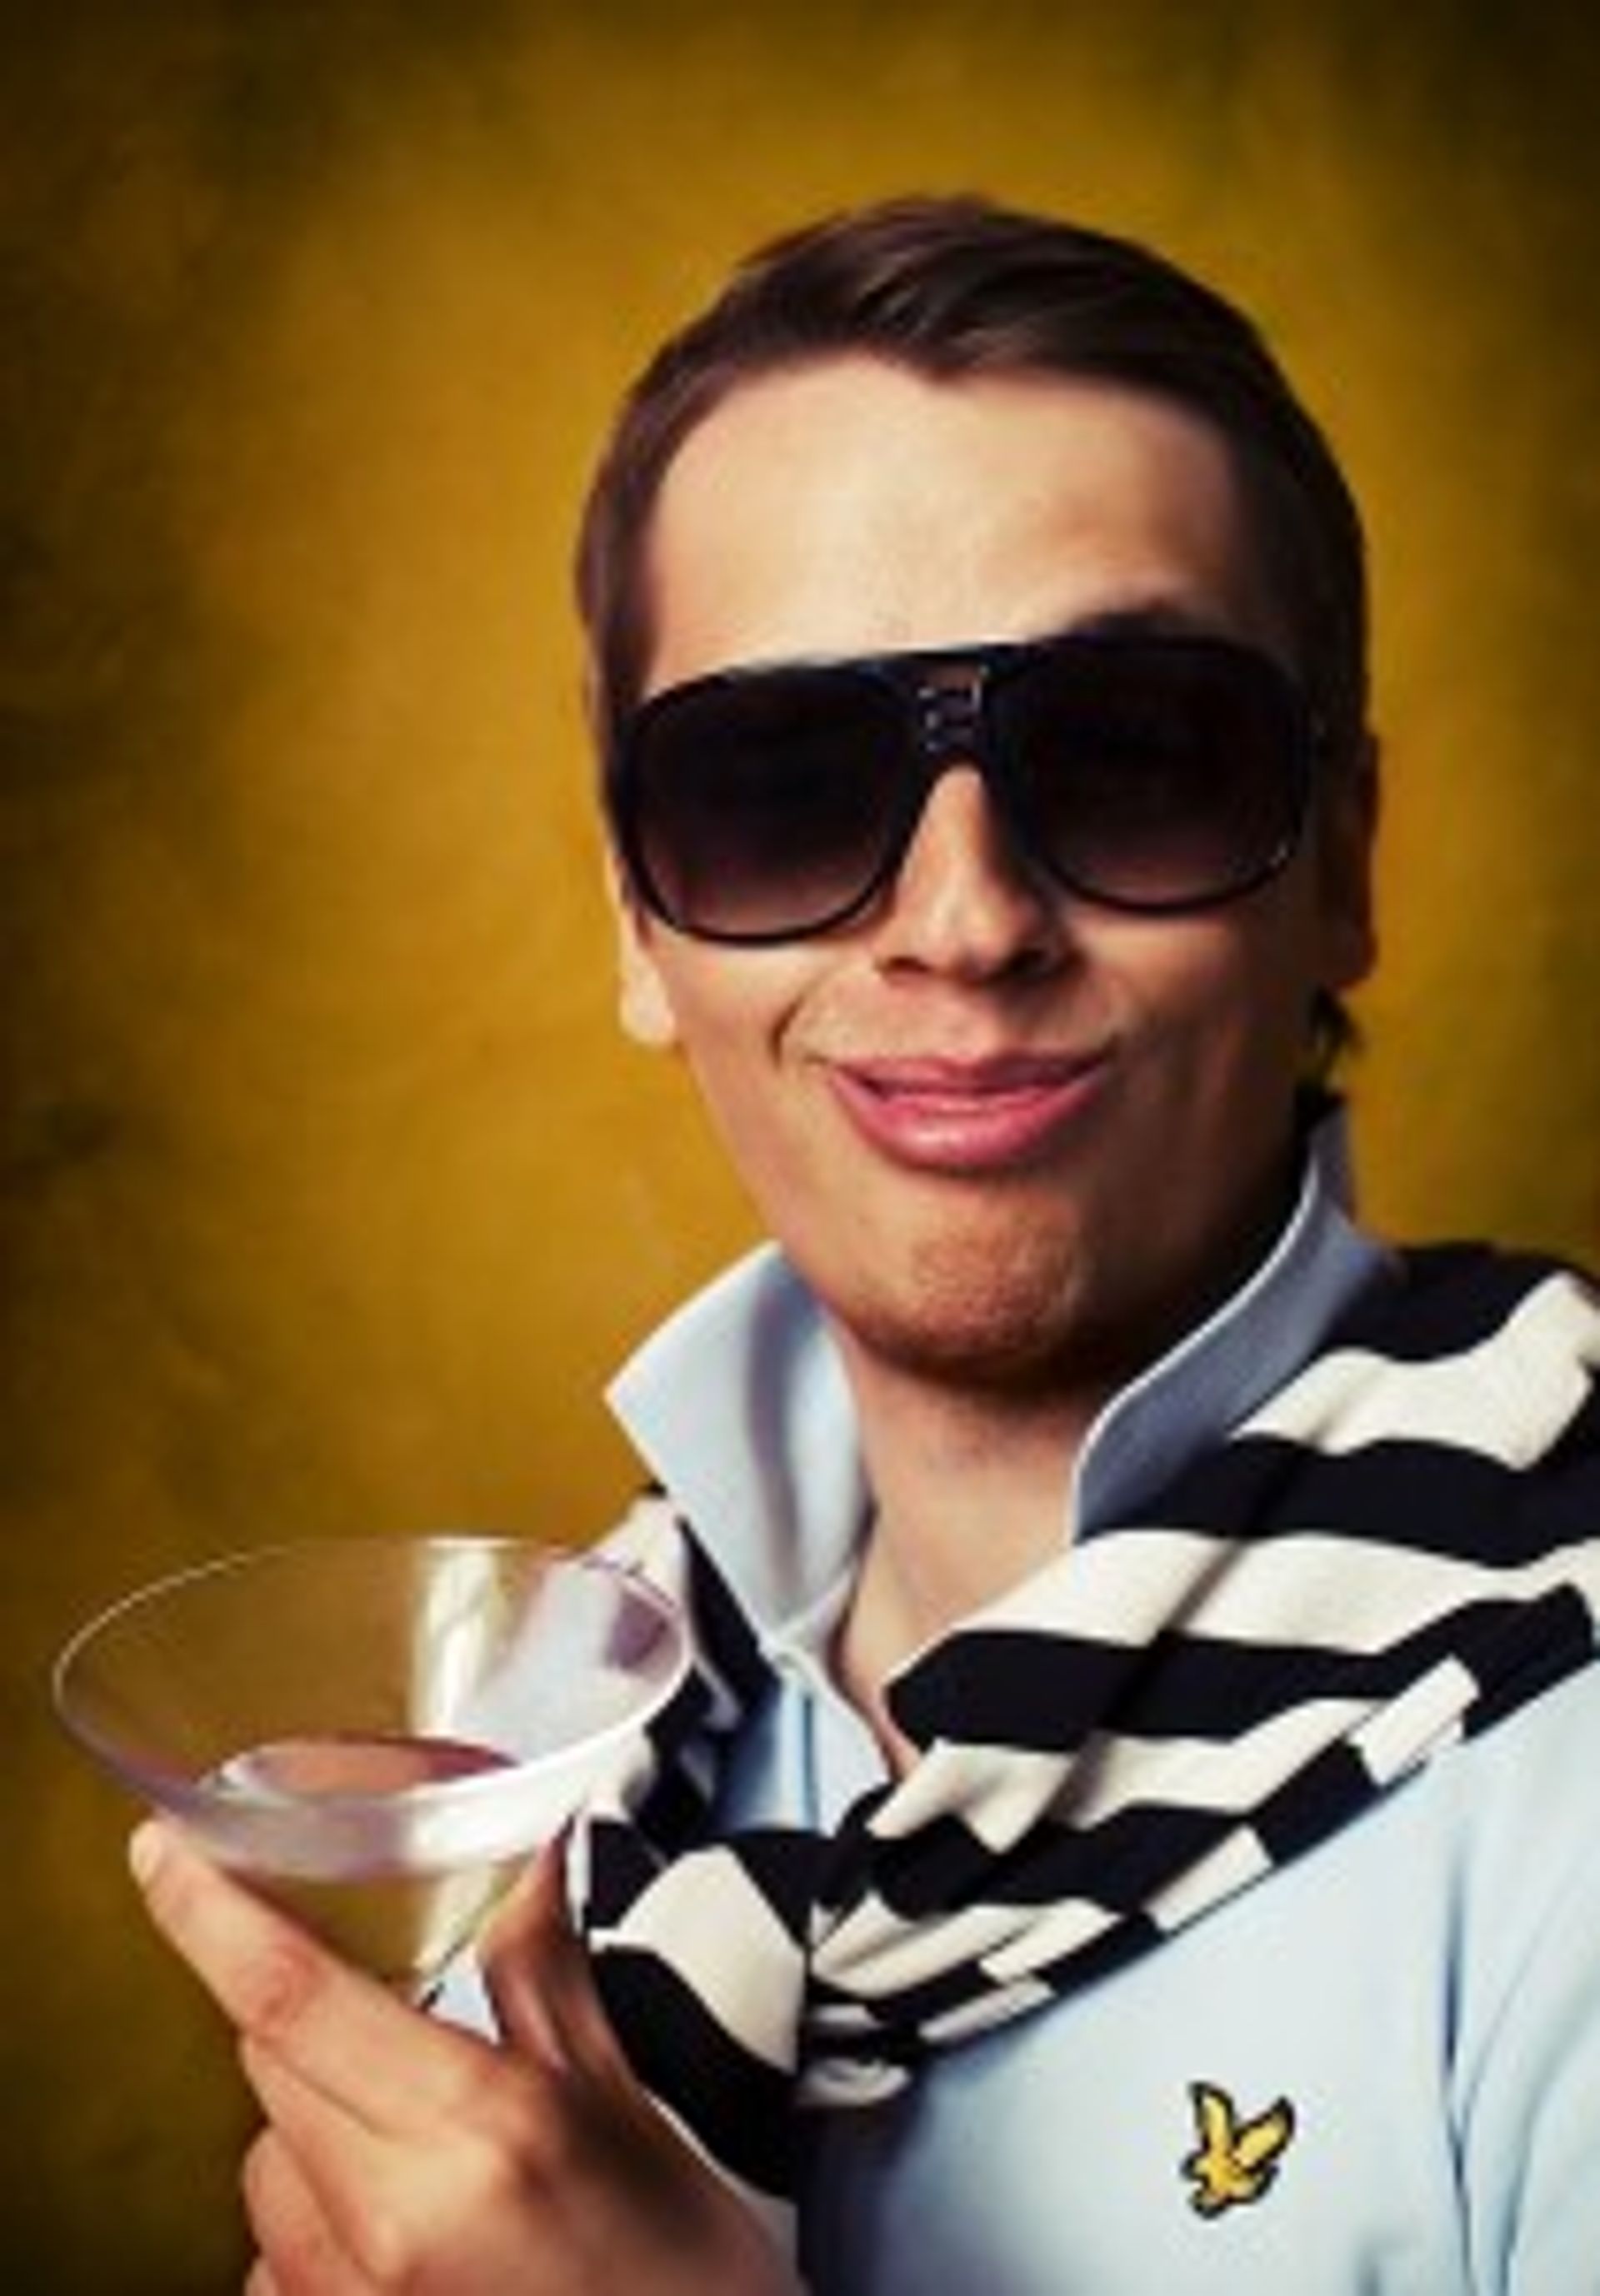 Man wearing sunglasses and holding a martini glass.